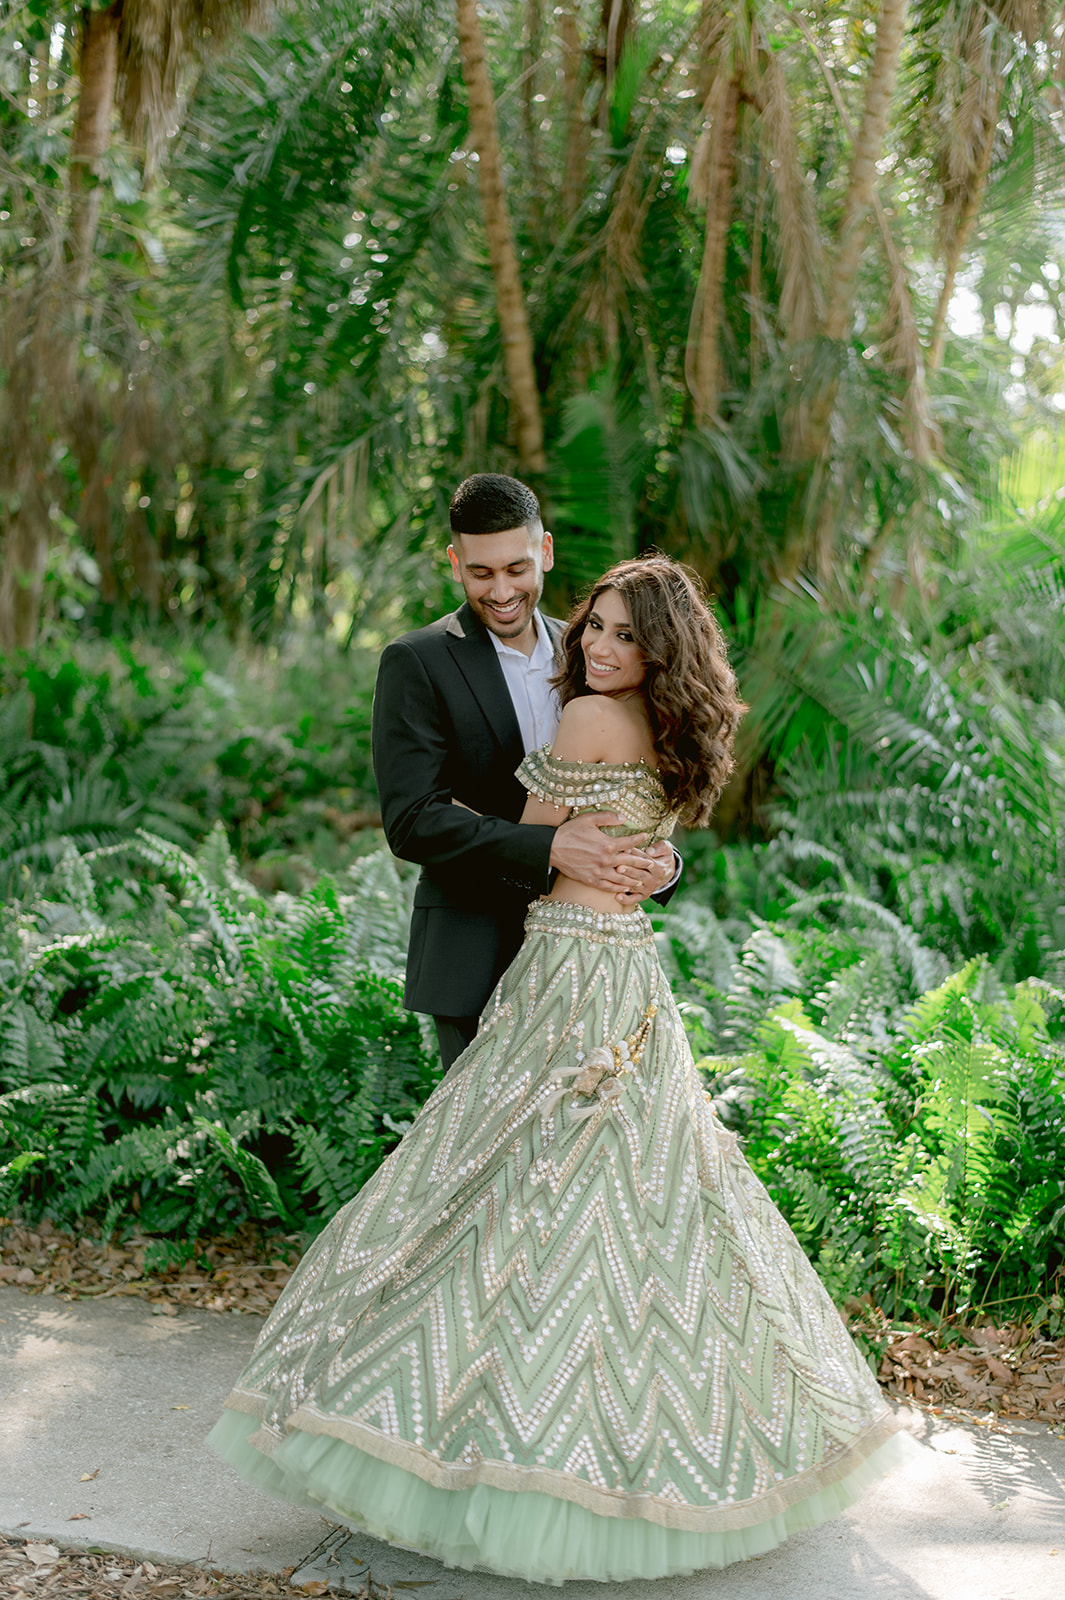 "Ringling Museum engagement shoot showcases the beauty of the Ca' d'Zan mansion and Indian couple"
